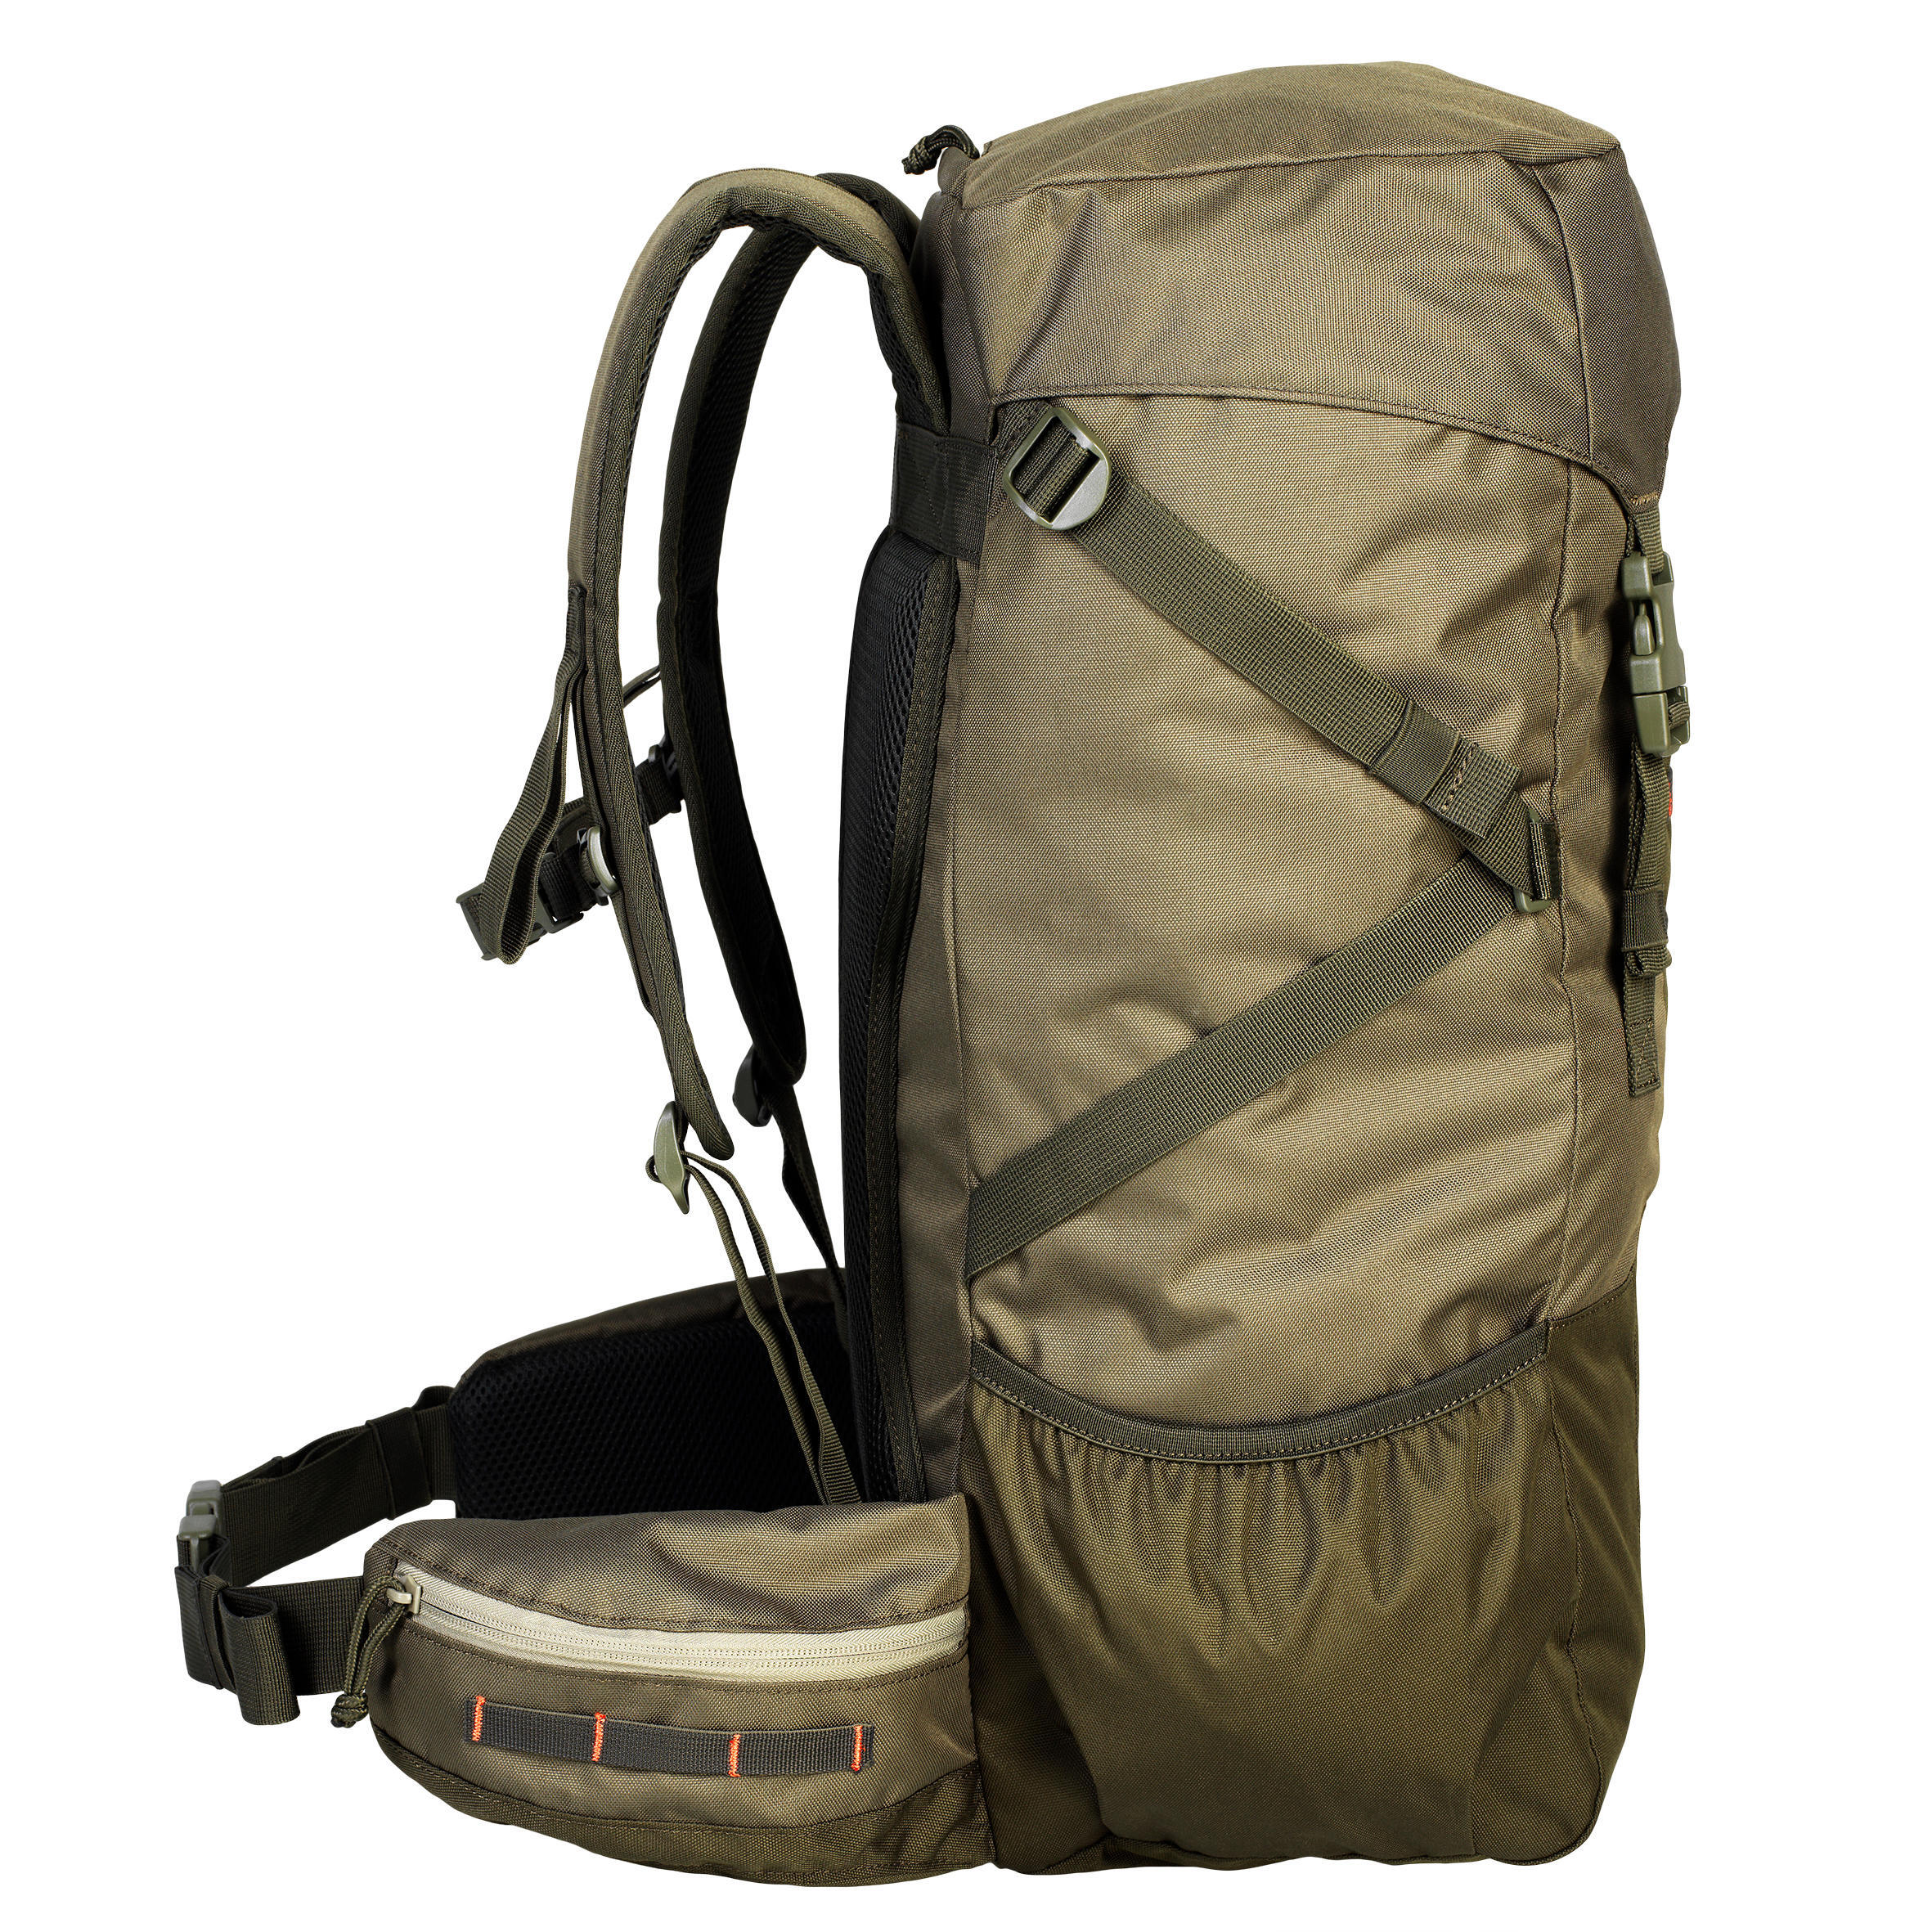 50L Backpack for Camping - Green 4/16